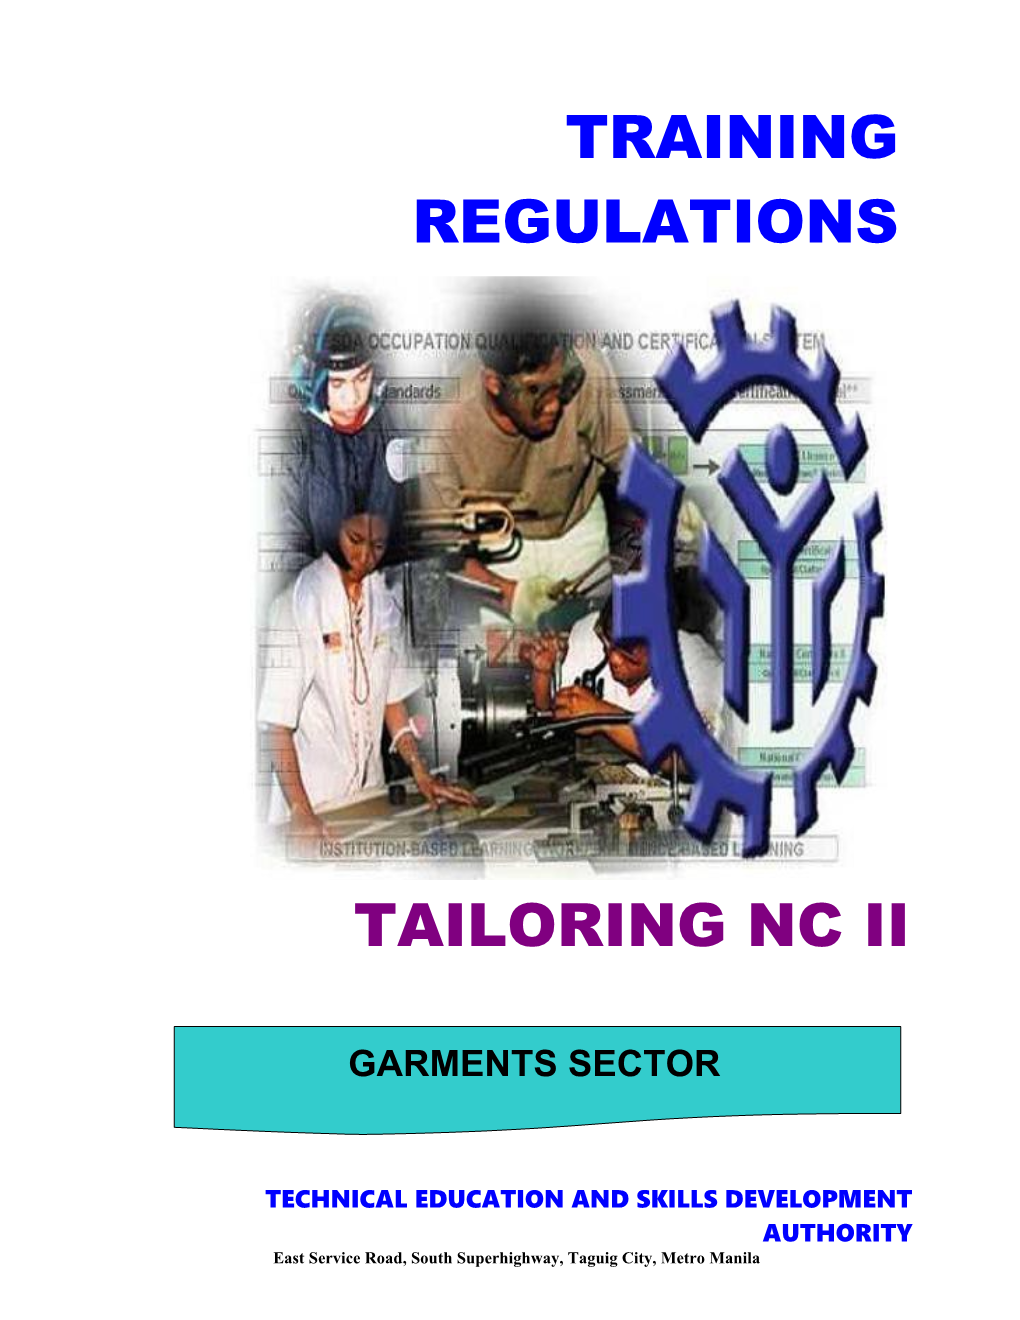 TR Tailoring NC II (Garment) Promulgated March 2005